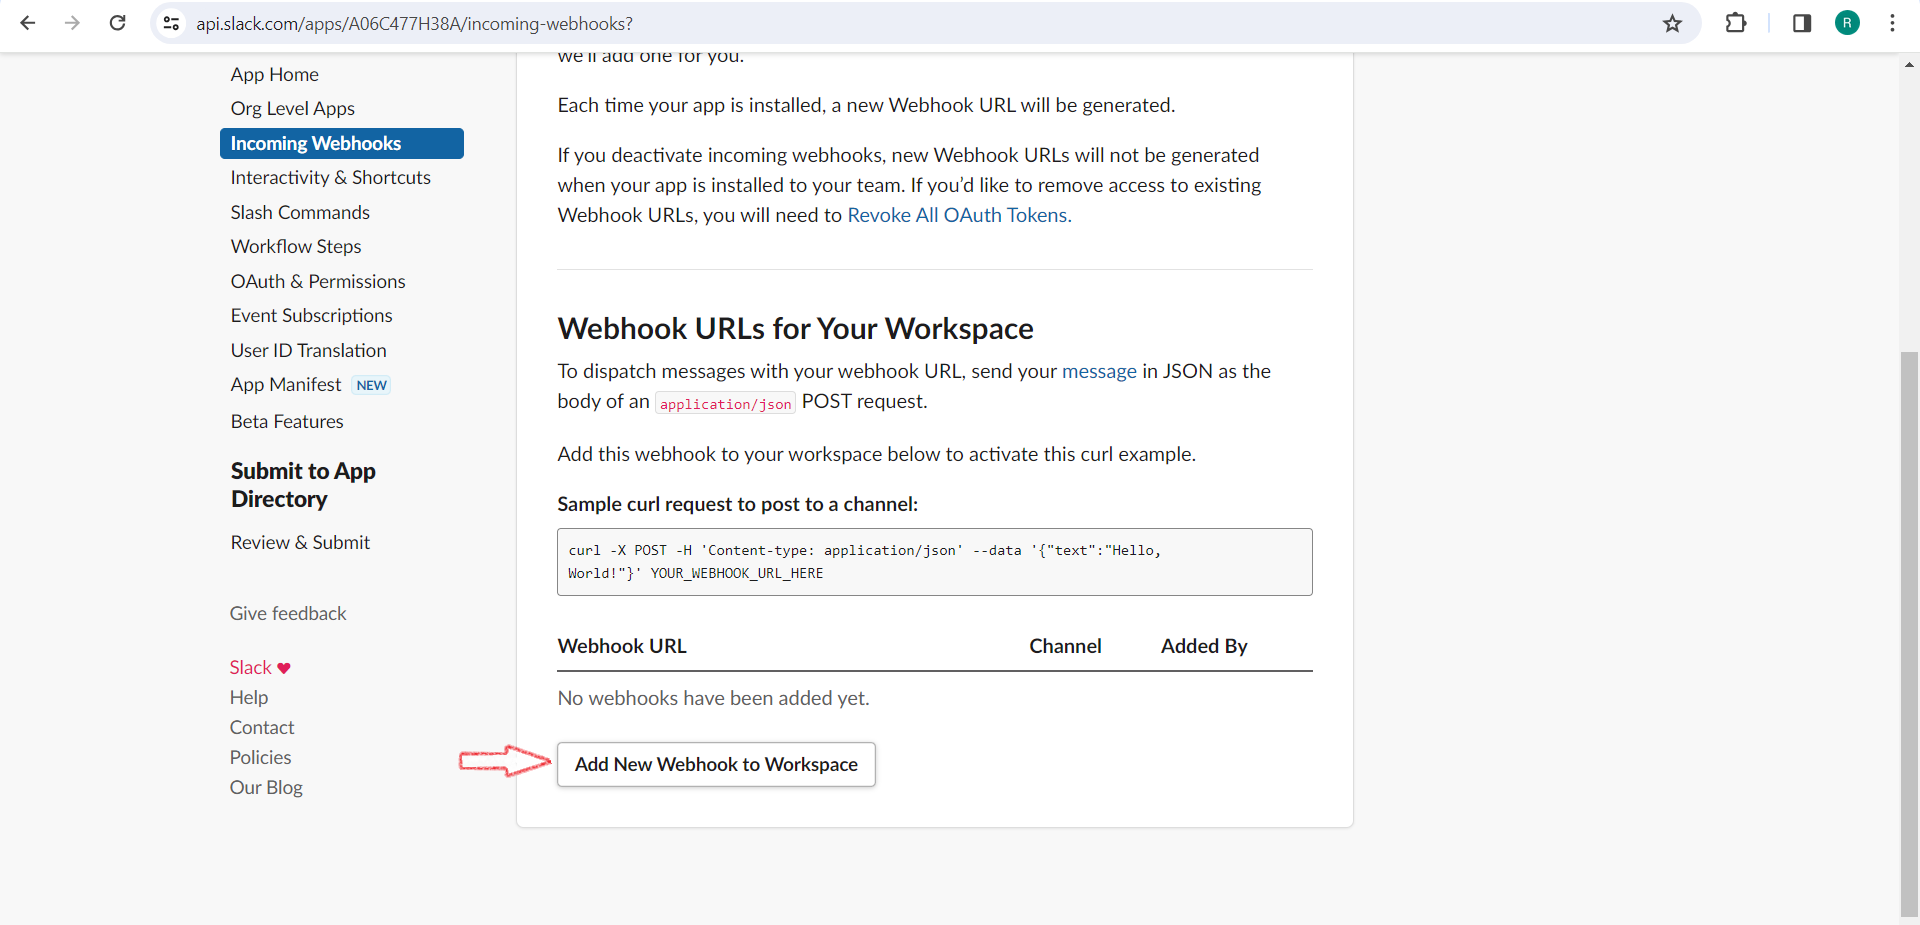 click on Add New Webhook to Workspace